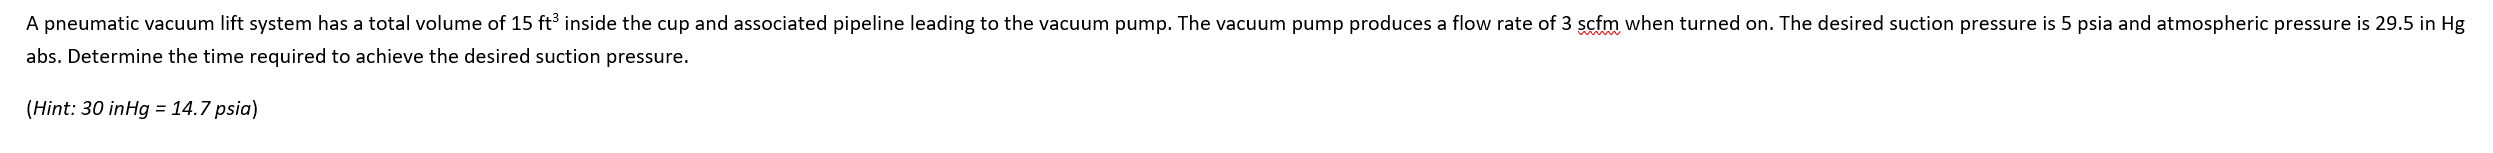 A pneumatic vacuum lift system has a total volume of 15 ft³ inside the cup and associated pipeline leading to the vacuum pump. The vacuum pump produces a flow rate of 3 scfm when turned on. The desired suction pressure is 5 psia and atmospheric pressure is 29.5 in Hg
abs. Determine the time required to achieve the desired suction pressure.
(Hint: 30 inHg = 14.7 psia)